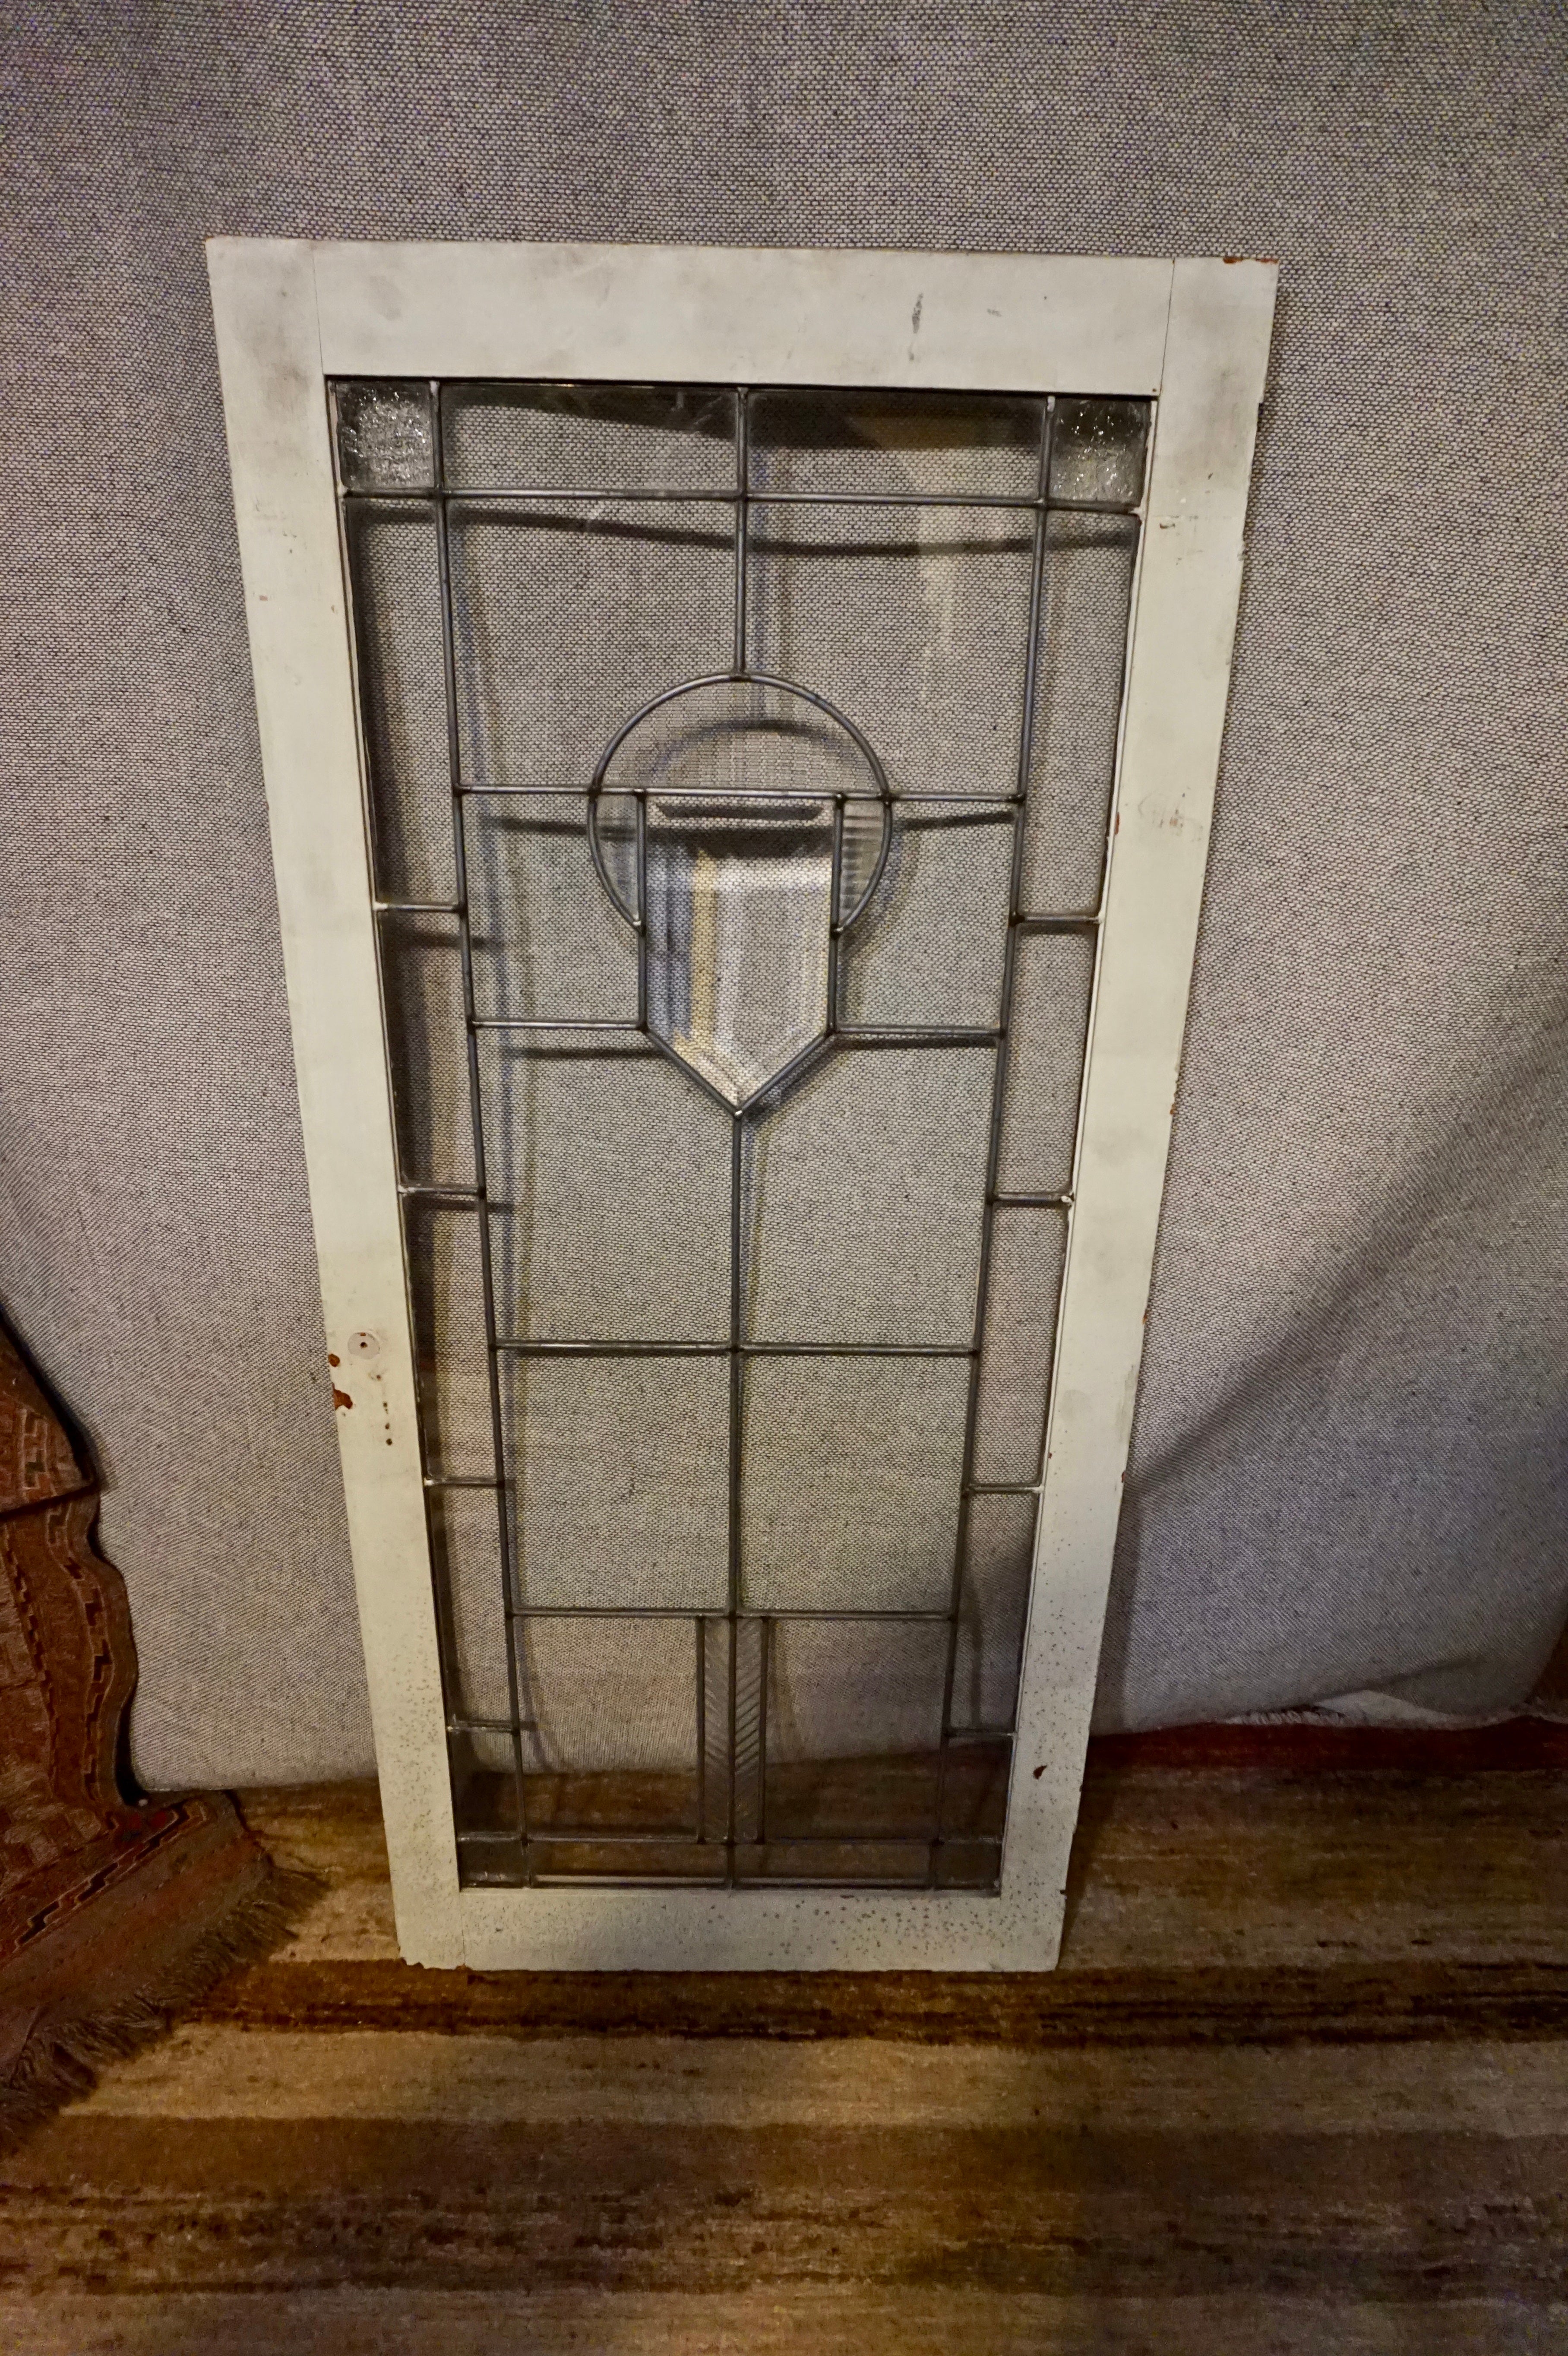 Circa 1920
Original paint and patina with aesthetic glass in good condition.